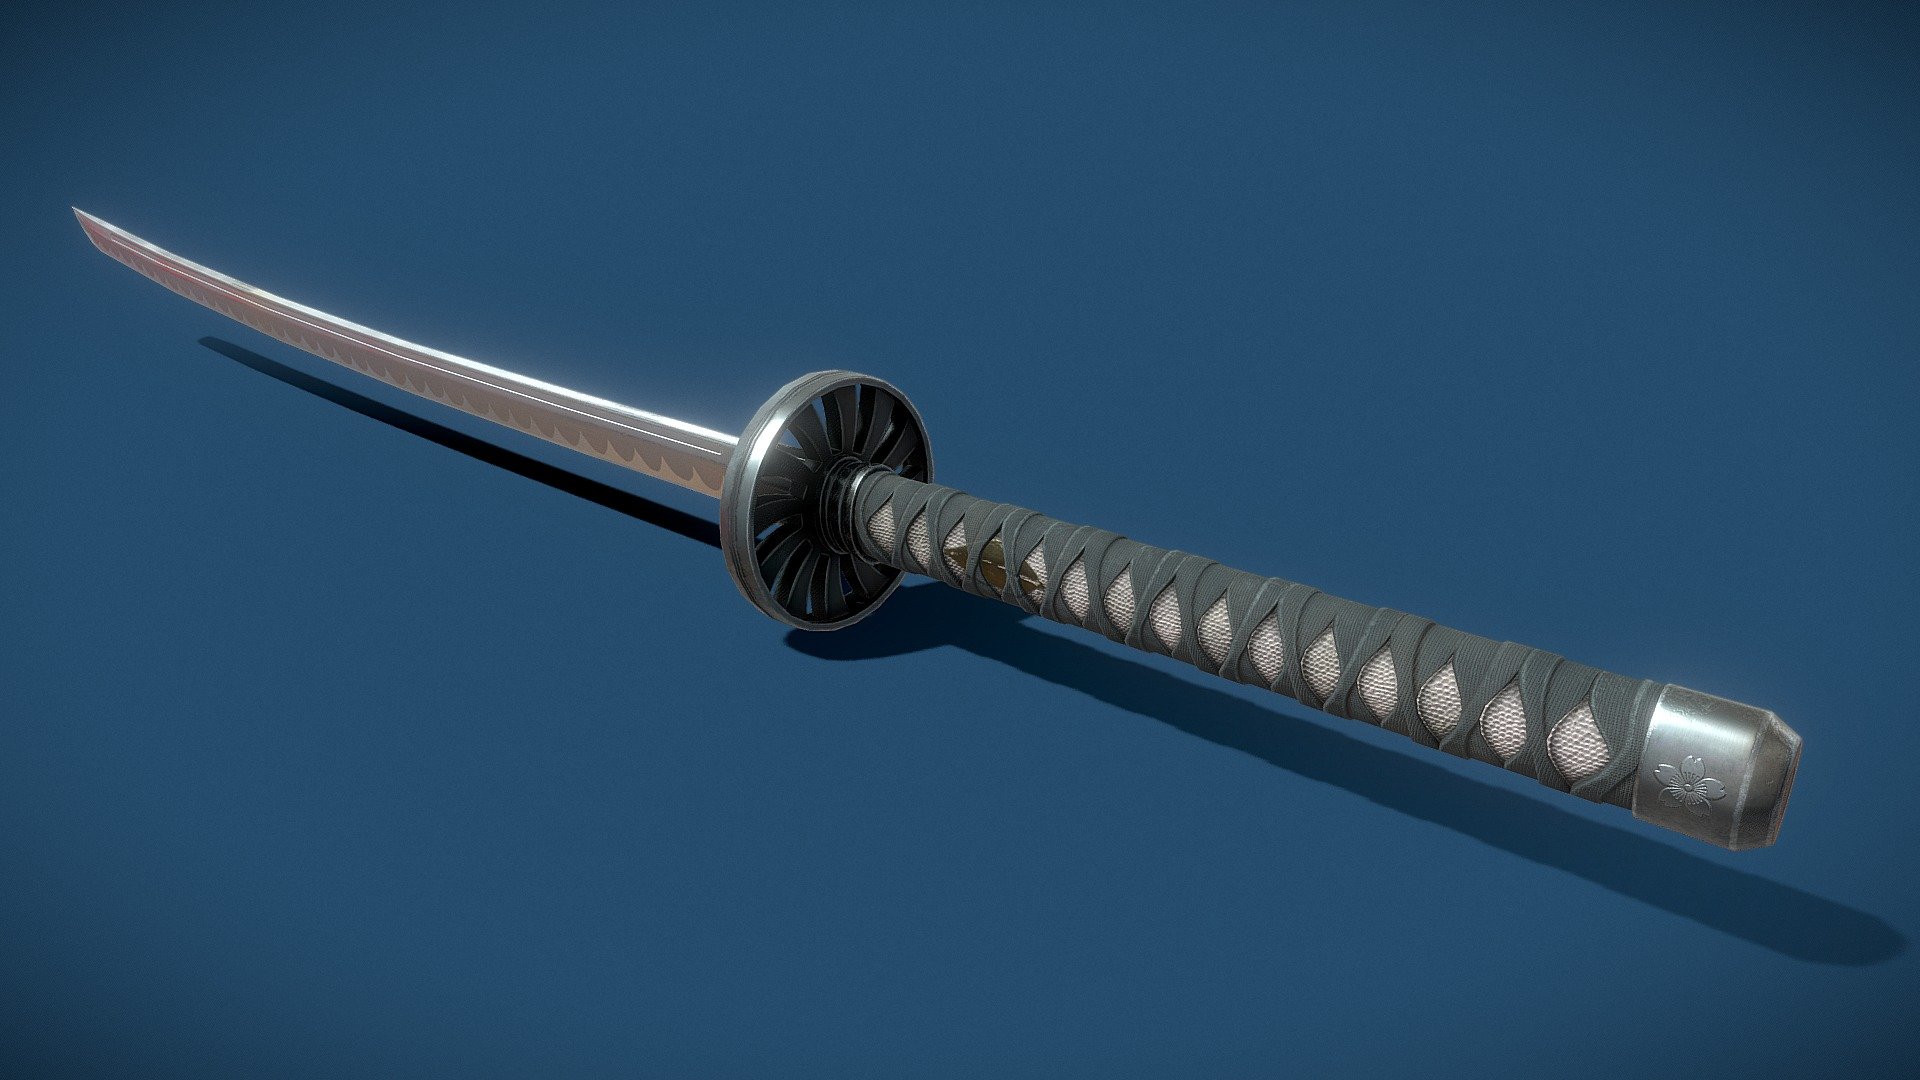 Deadly katana is traditional cold steel melee weapon of the Japanese samurai. Low Poly Sword. Compiled from several references. Optimized for games (game ready). Suitable for close-UPS, illustrations and various renderings. Textures set in 4K 3d model